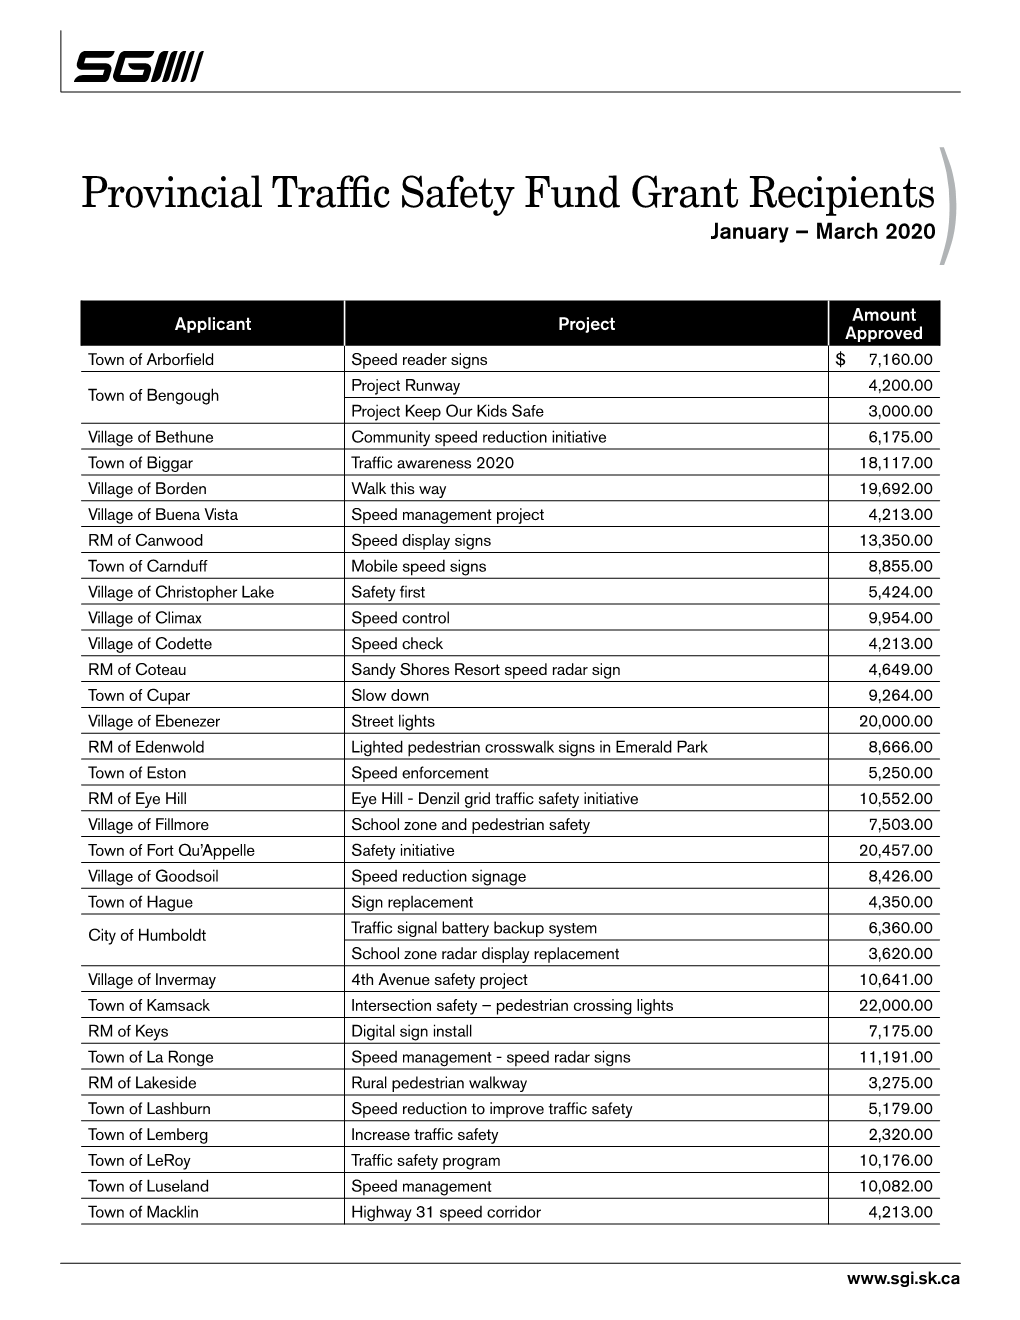 Provincial Traffic Safety Fund Grant Recipients January – March 2020